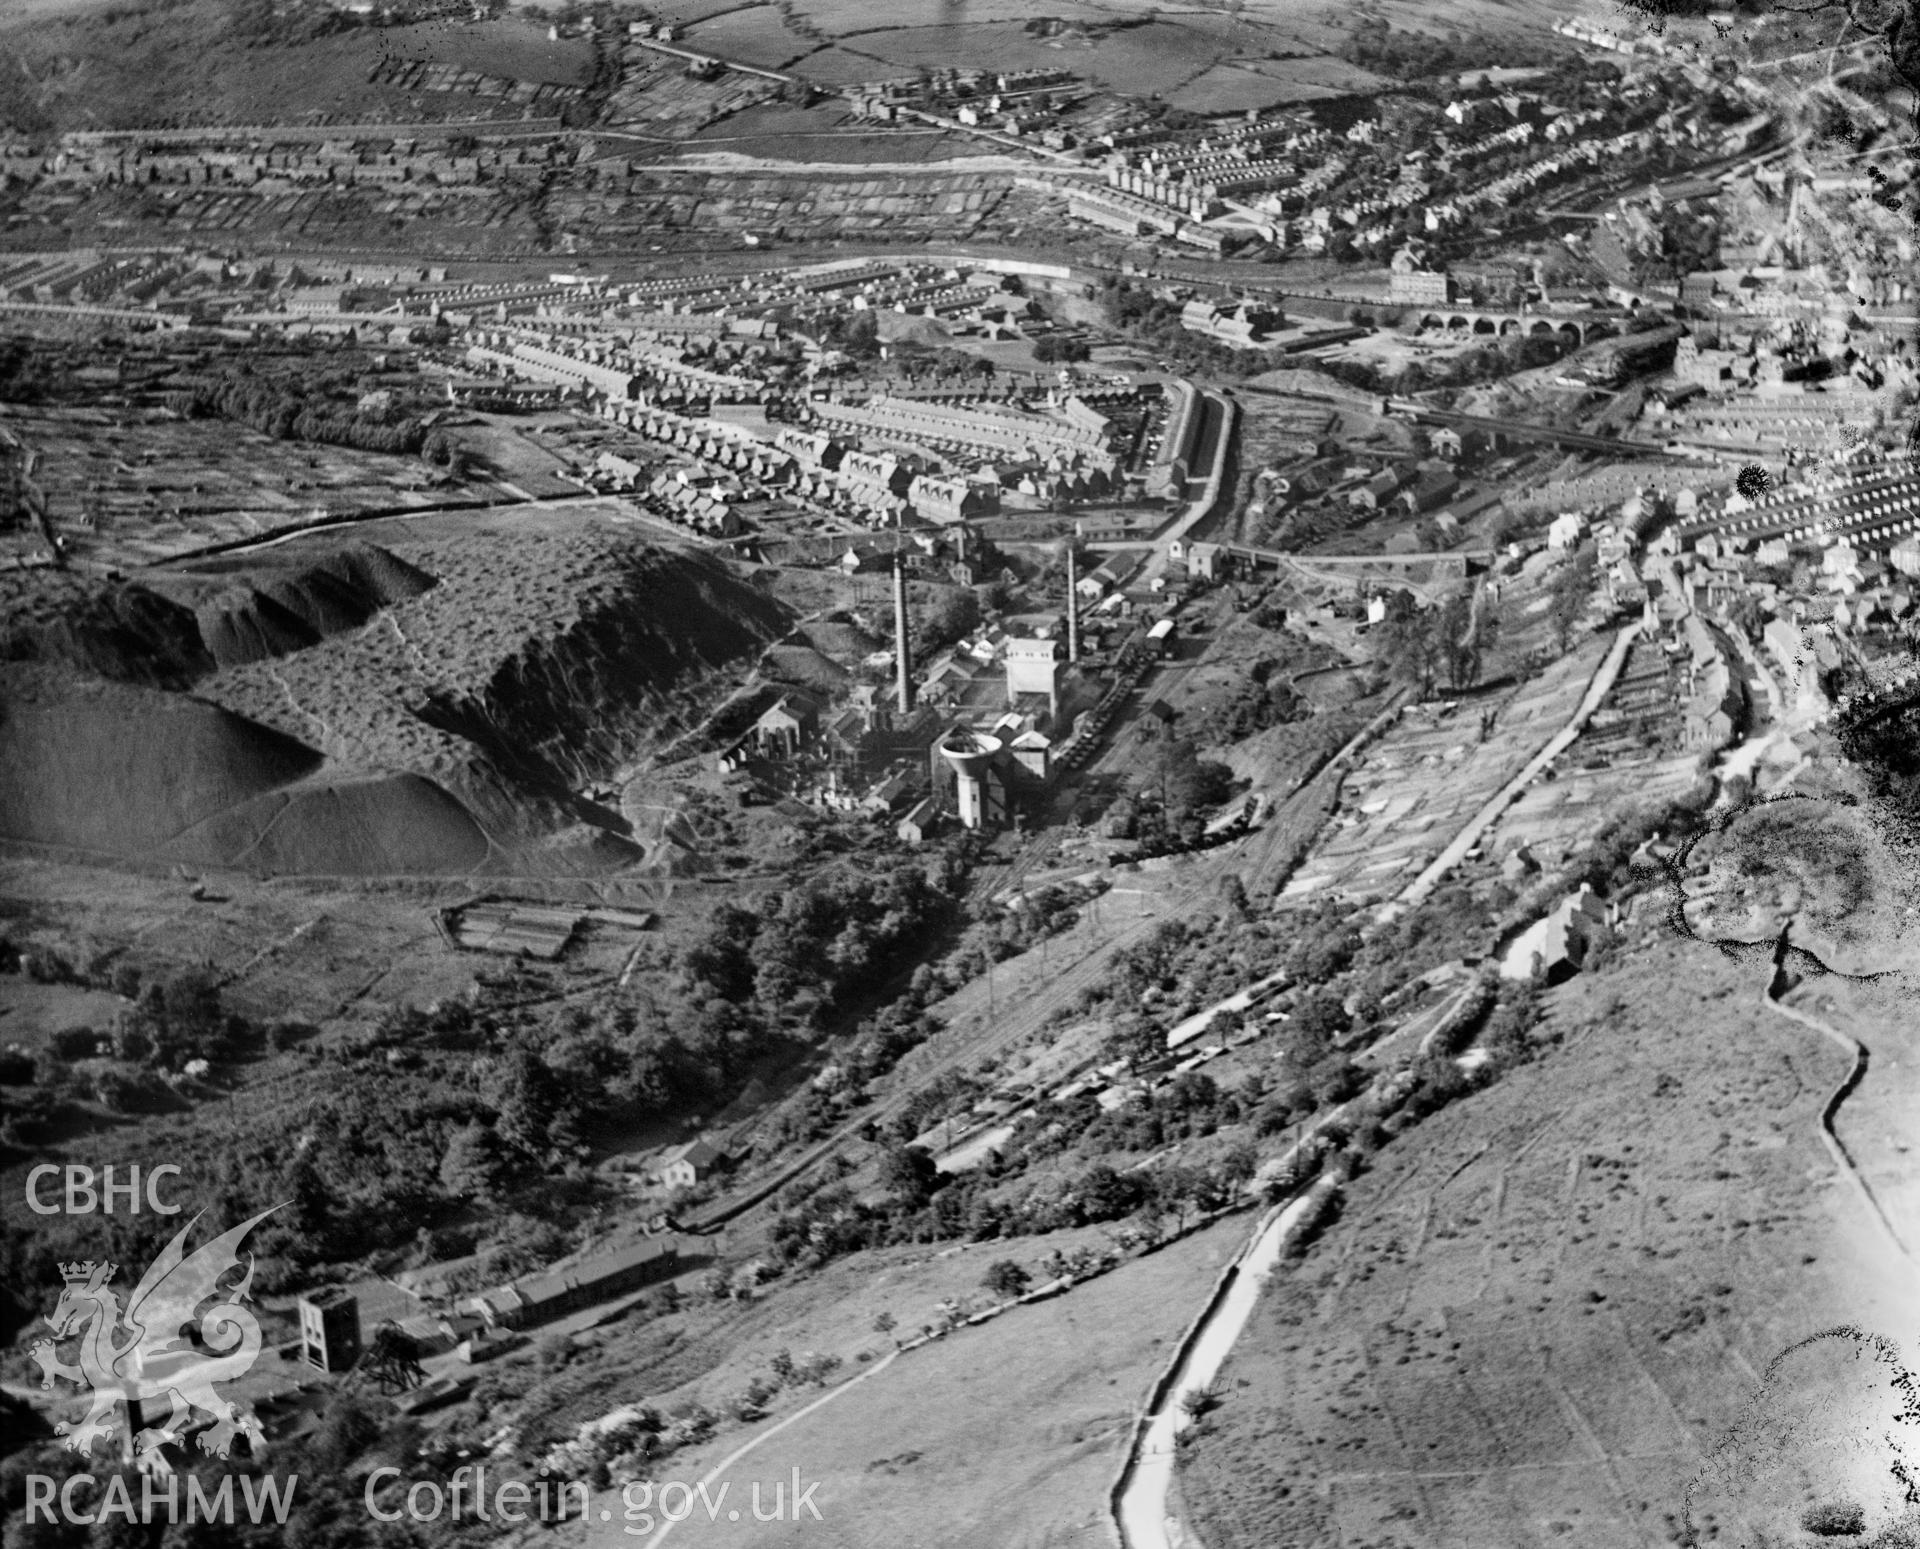 View of Maritime Colliery and coke works, Pontypridd, oblique aerial view. 5?x4? black and white glass plate negative.